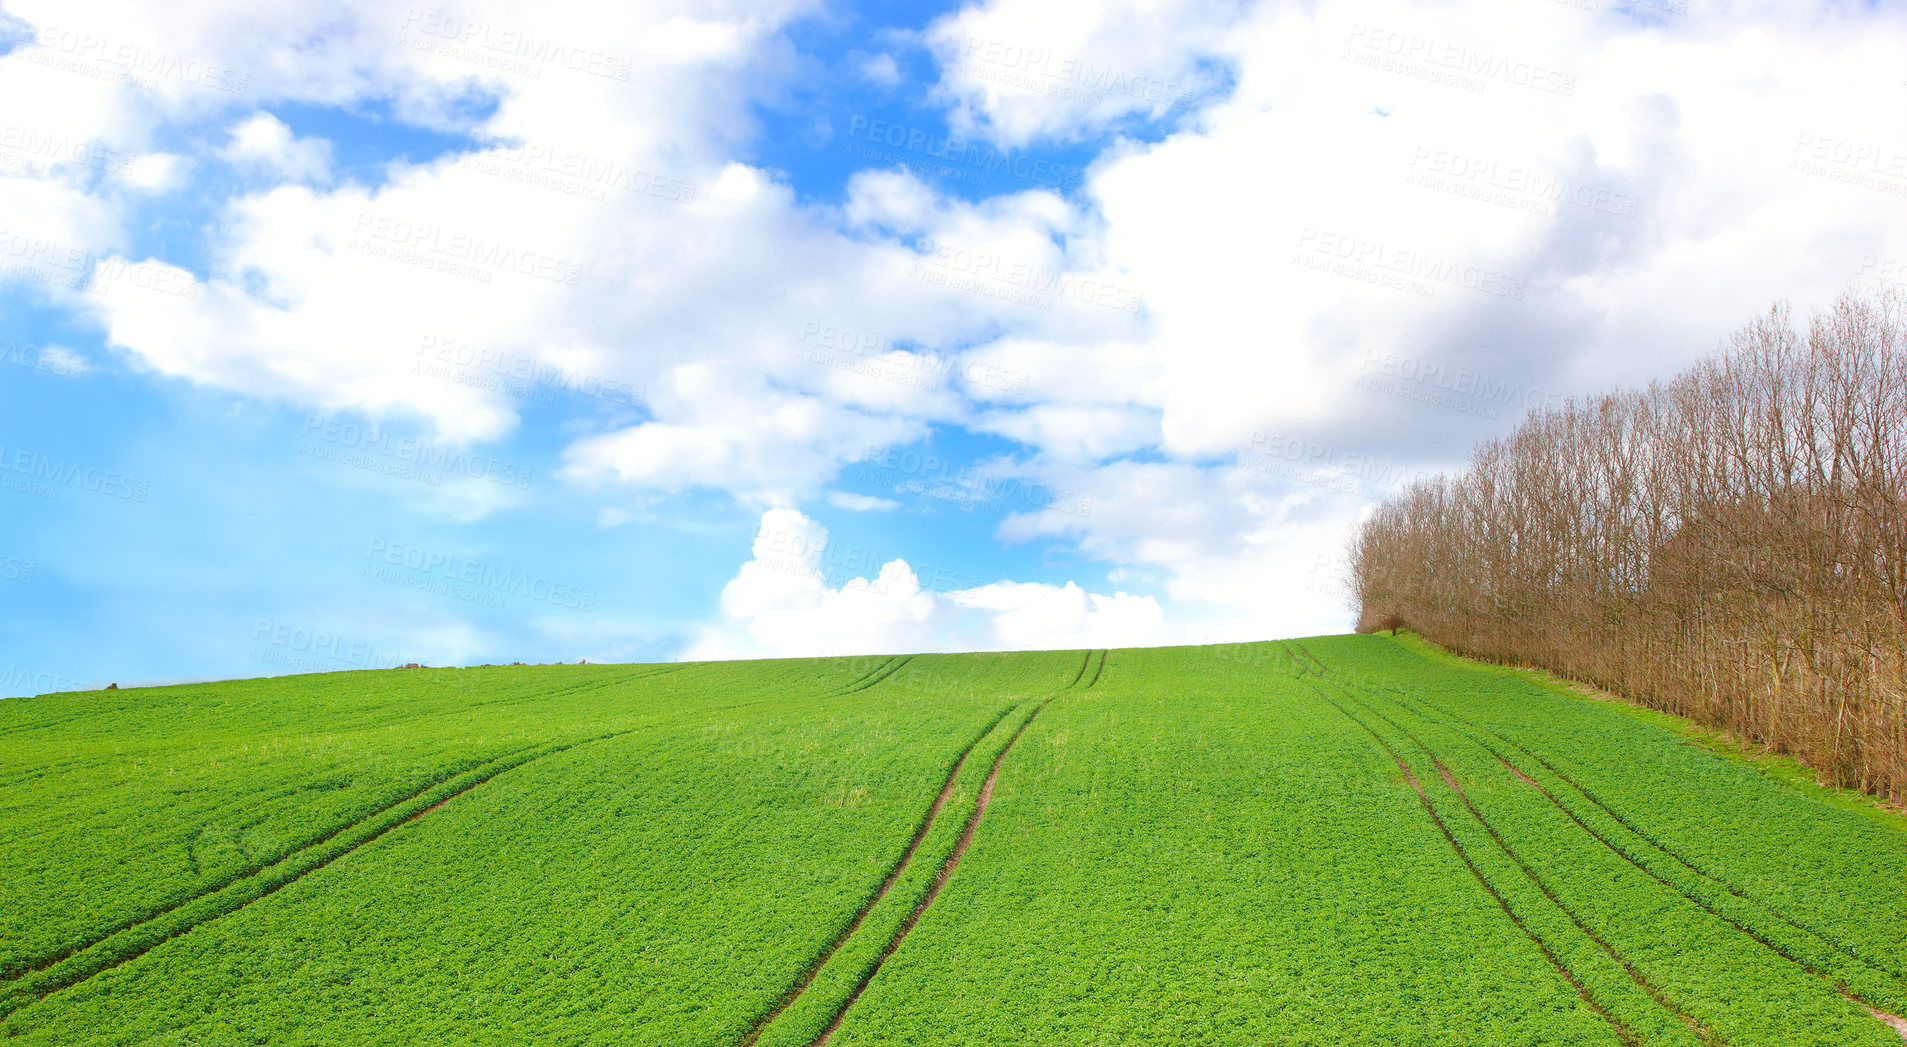 Buy stock photo Green field and trees with blue sky and clouds  in early spring